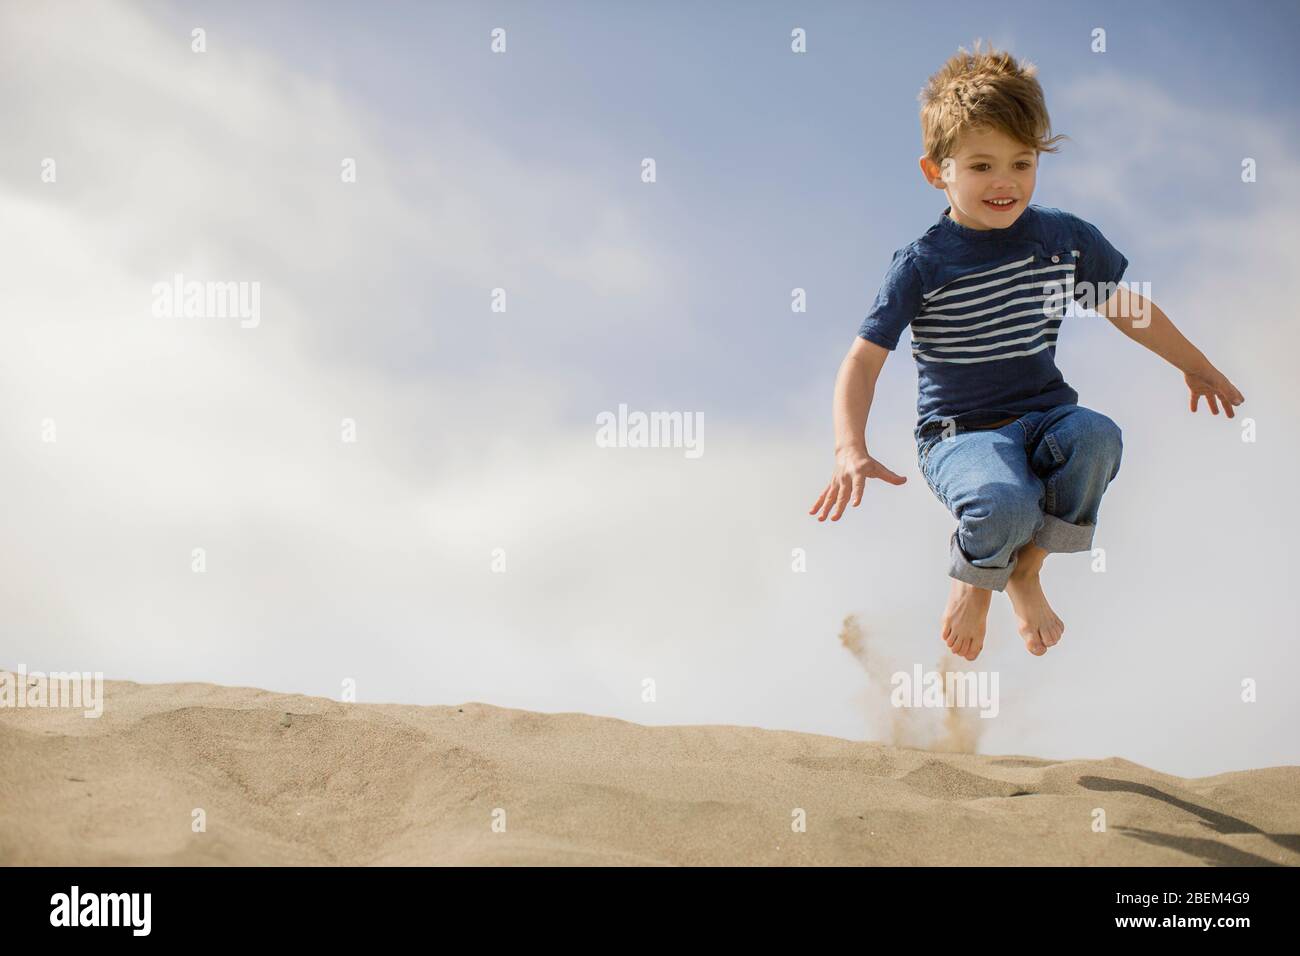 Young boy playing on sand dunes Stock Photo